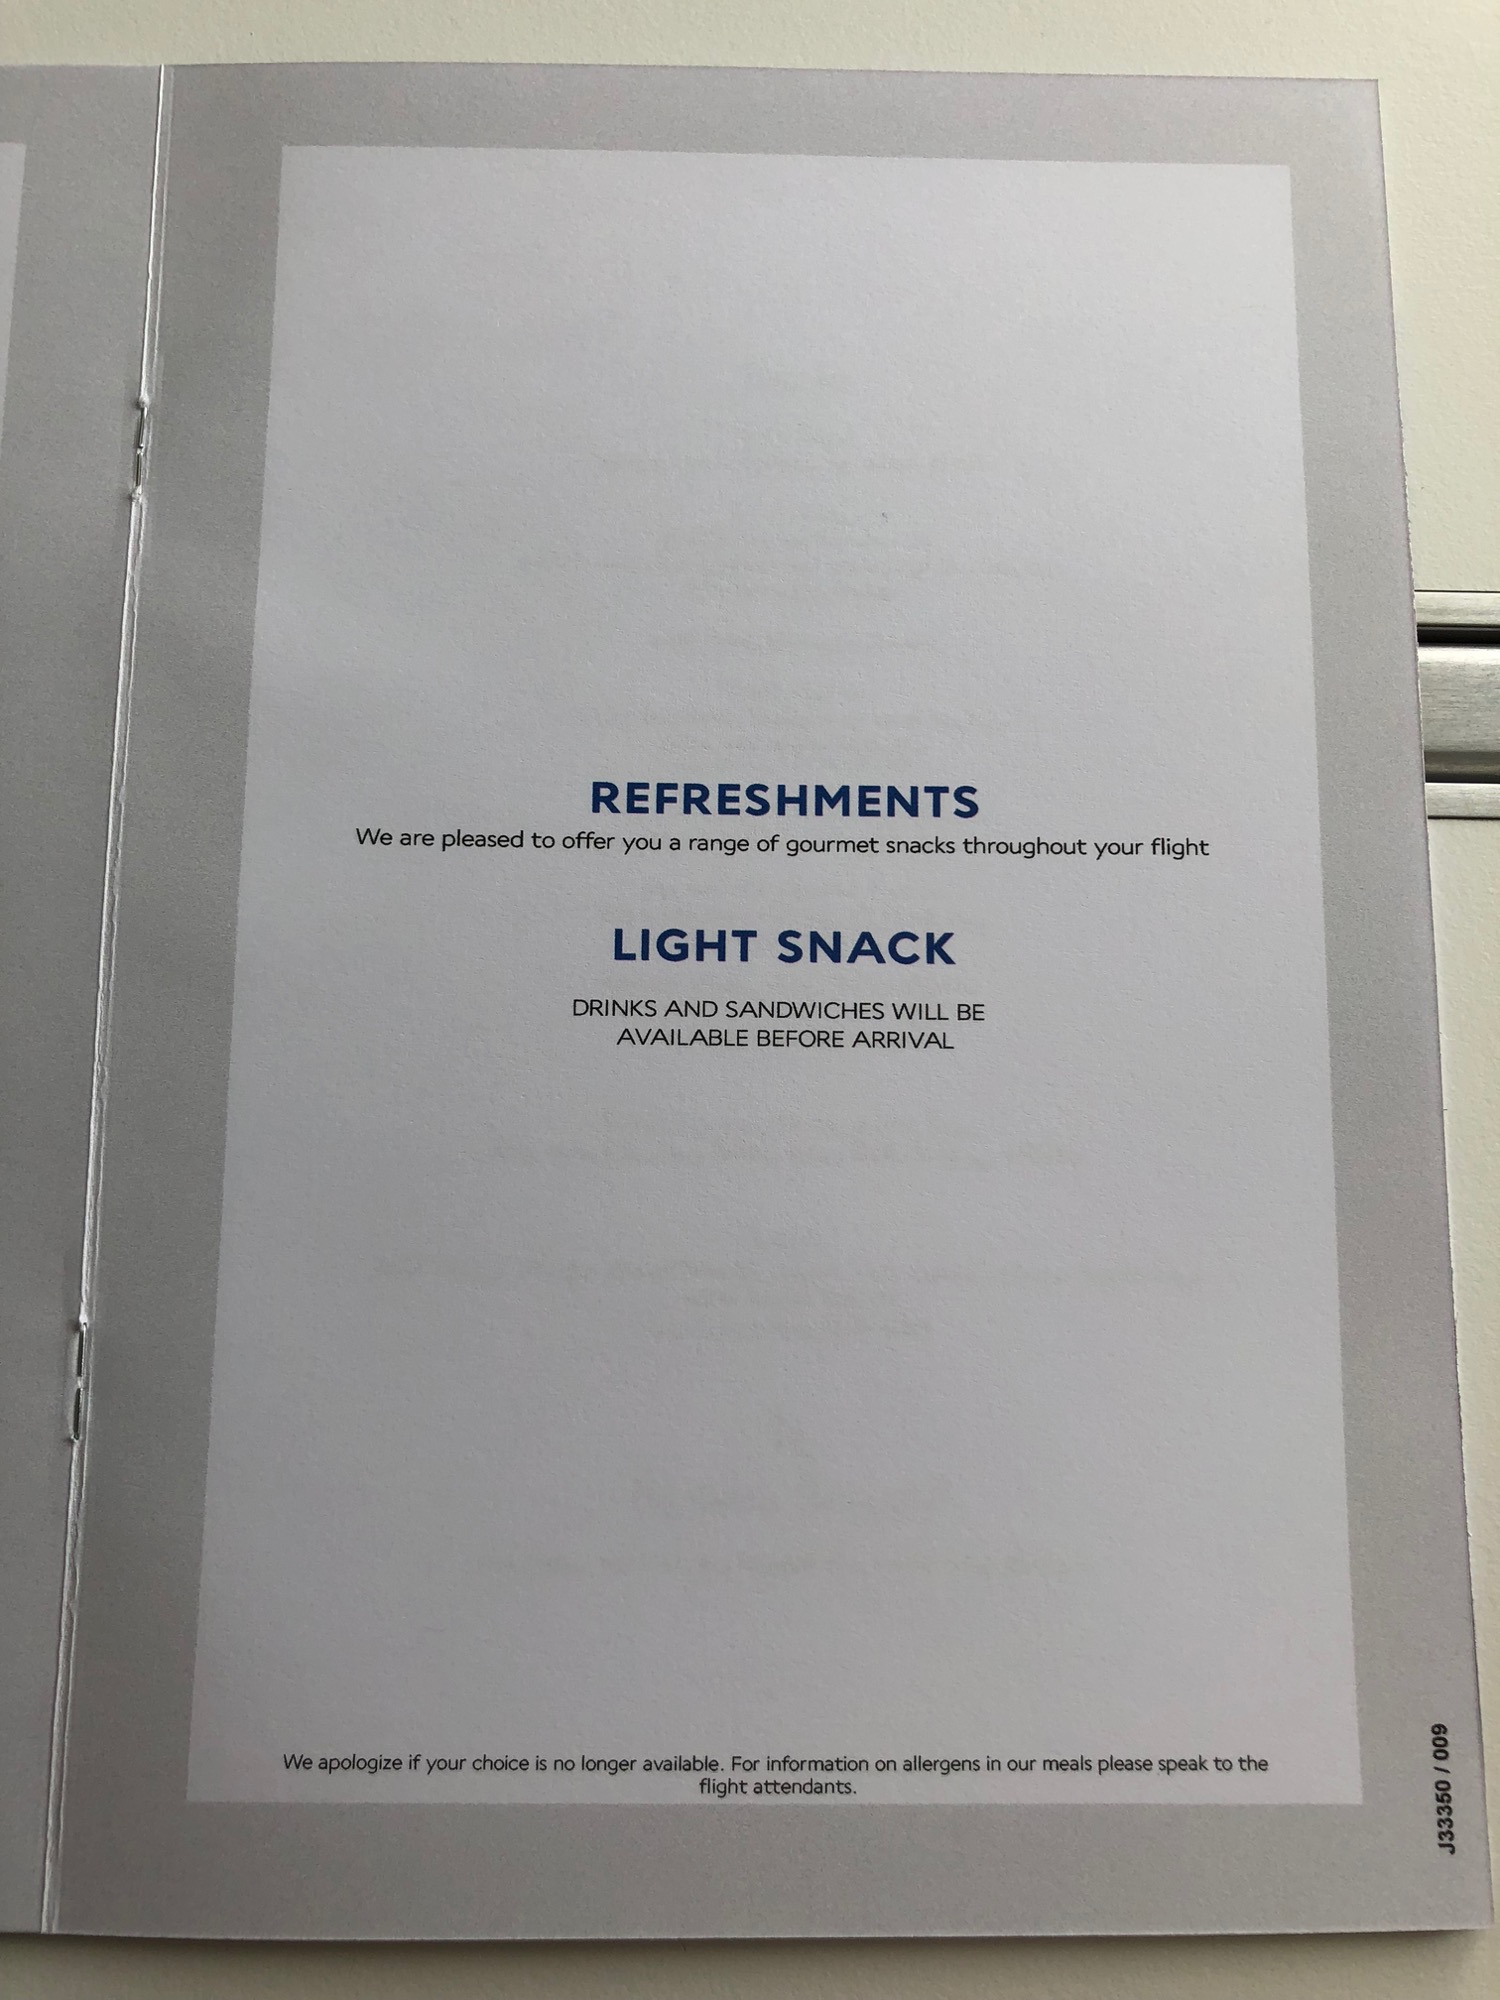 a white paper with blue text